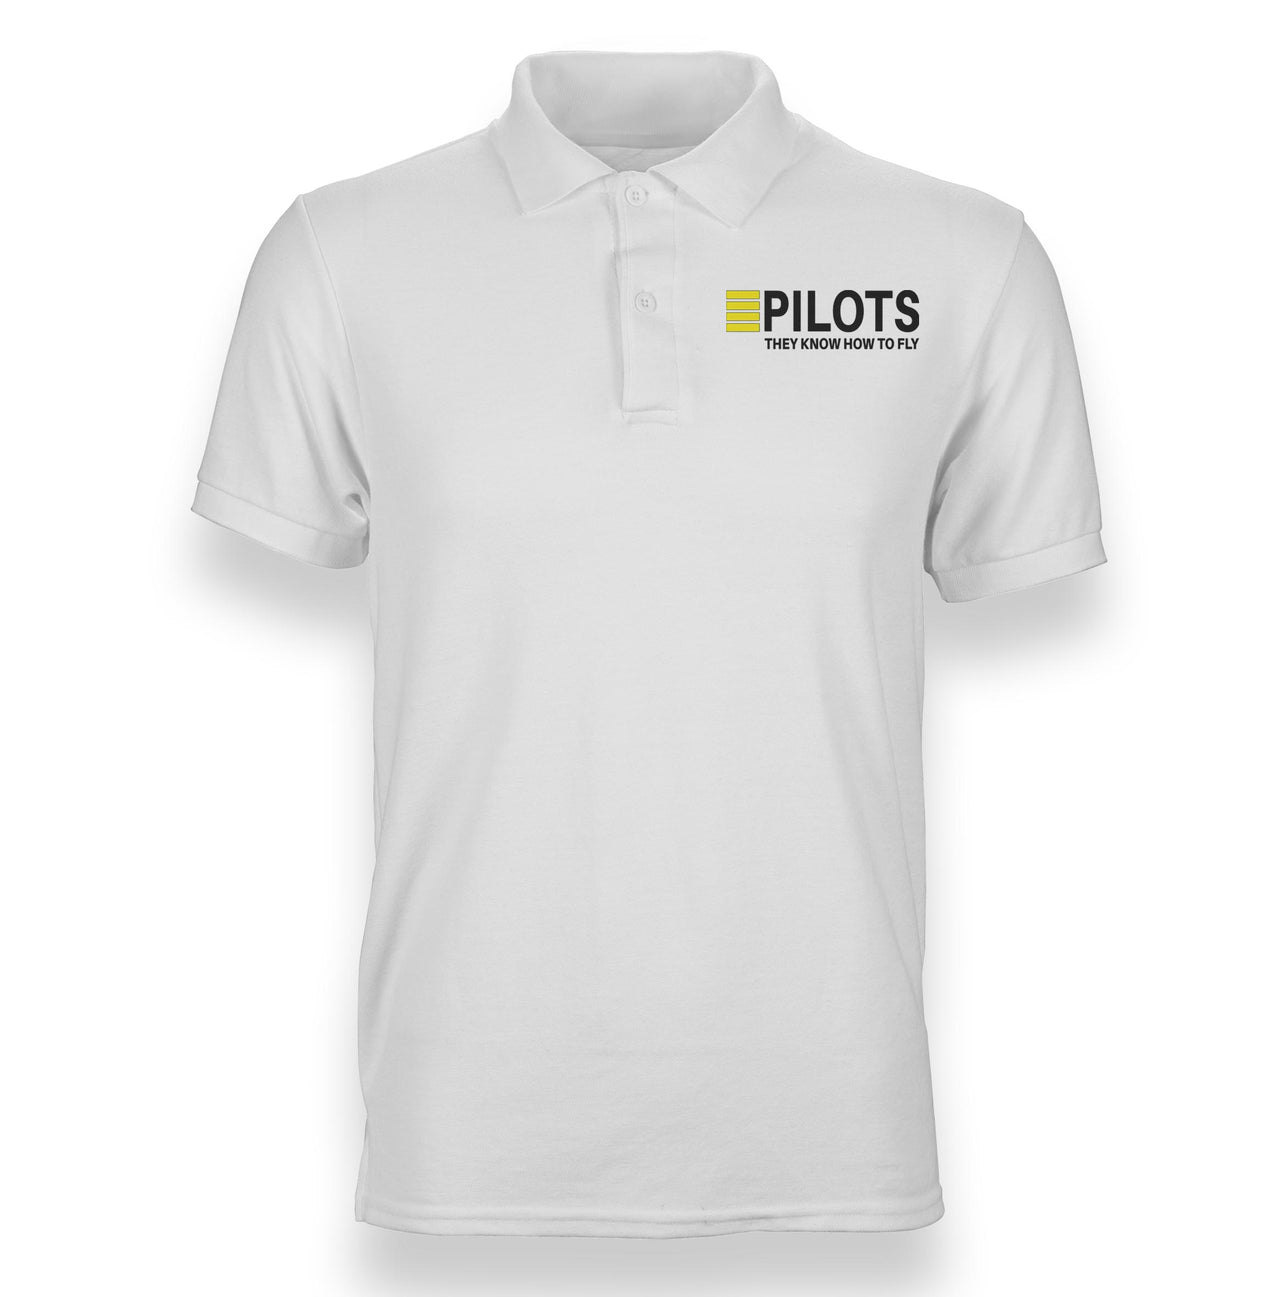 Pilots They Know How To Fly Designed Polo T-Shirts